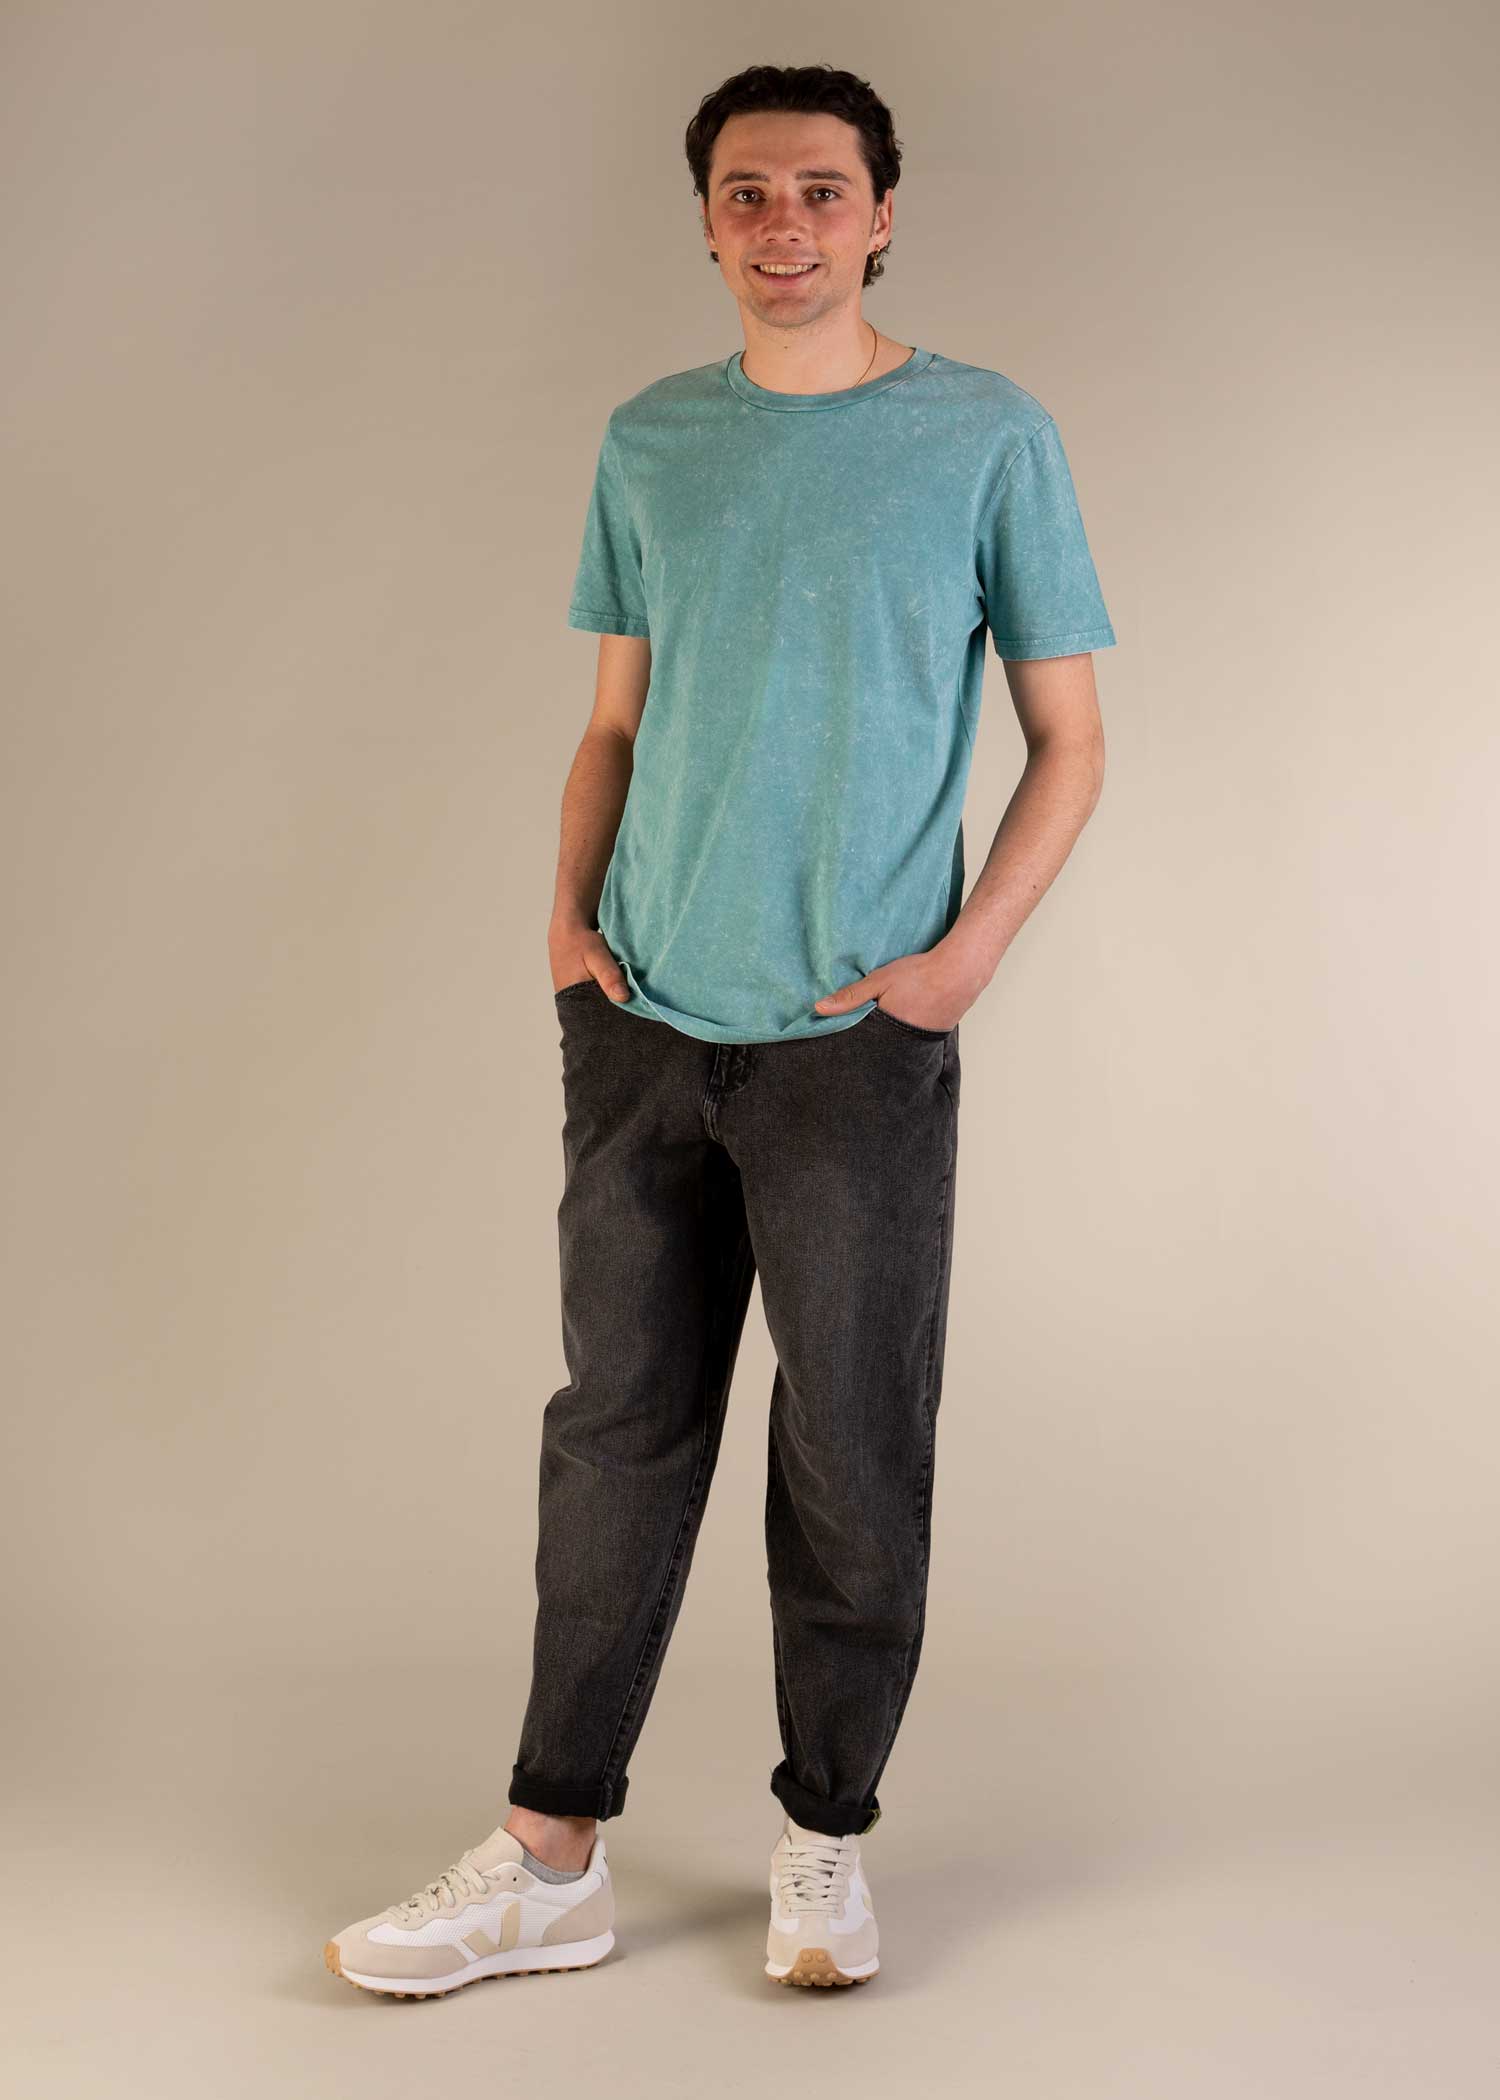 3RD ROCK sustainable activewear jeans - Kai is 6ft 1" with a 32" waist & 33" inseam, and is wearing a 32 RL. M